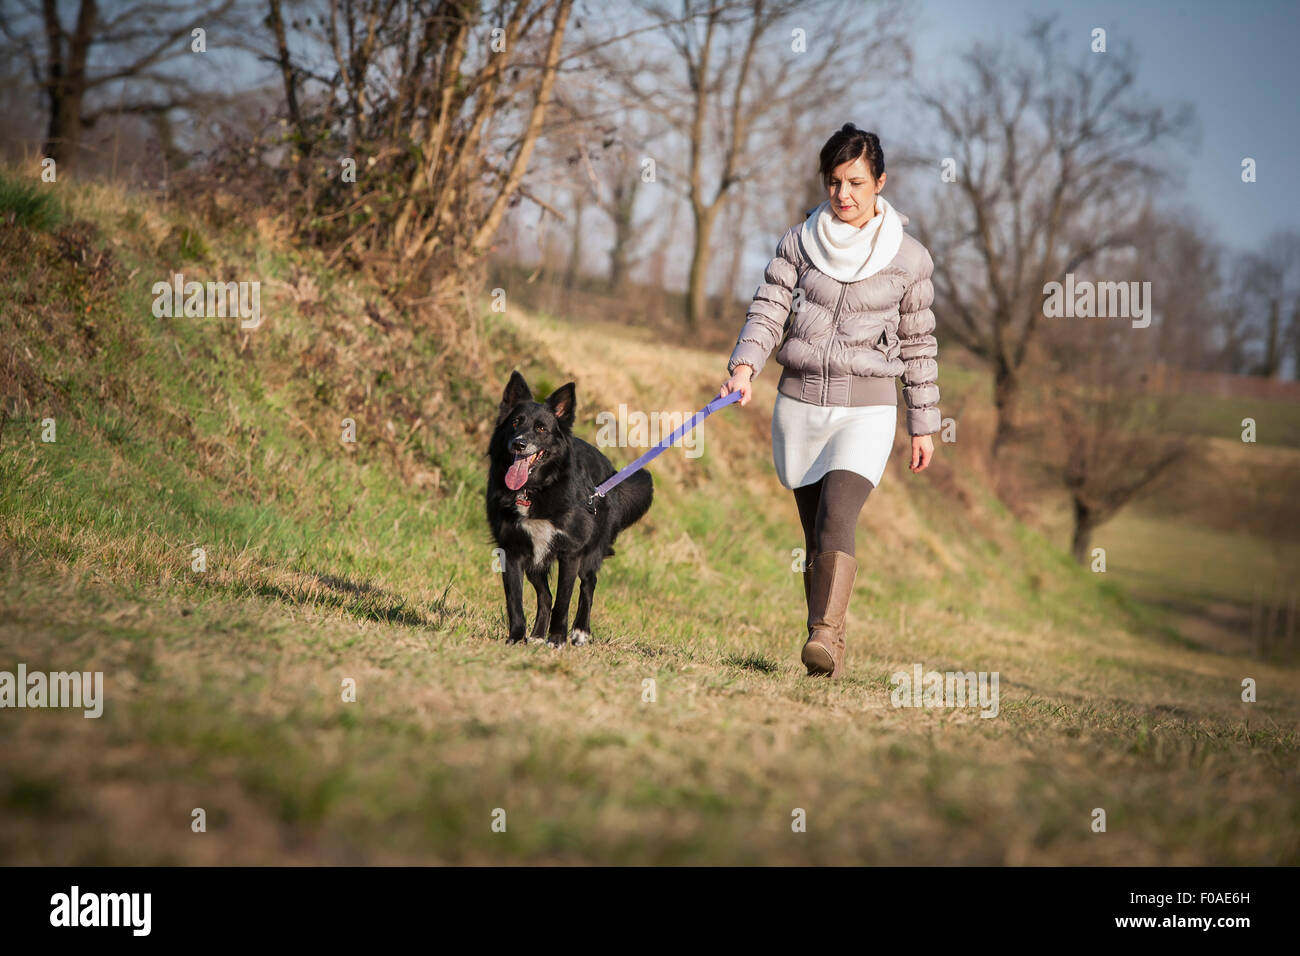 Mid adult woman walking her dog in field Stock Photo